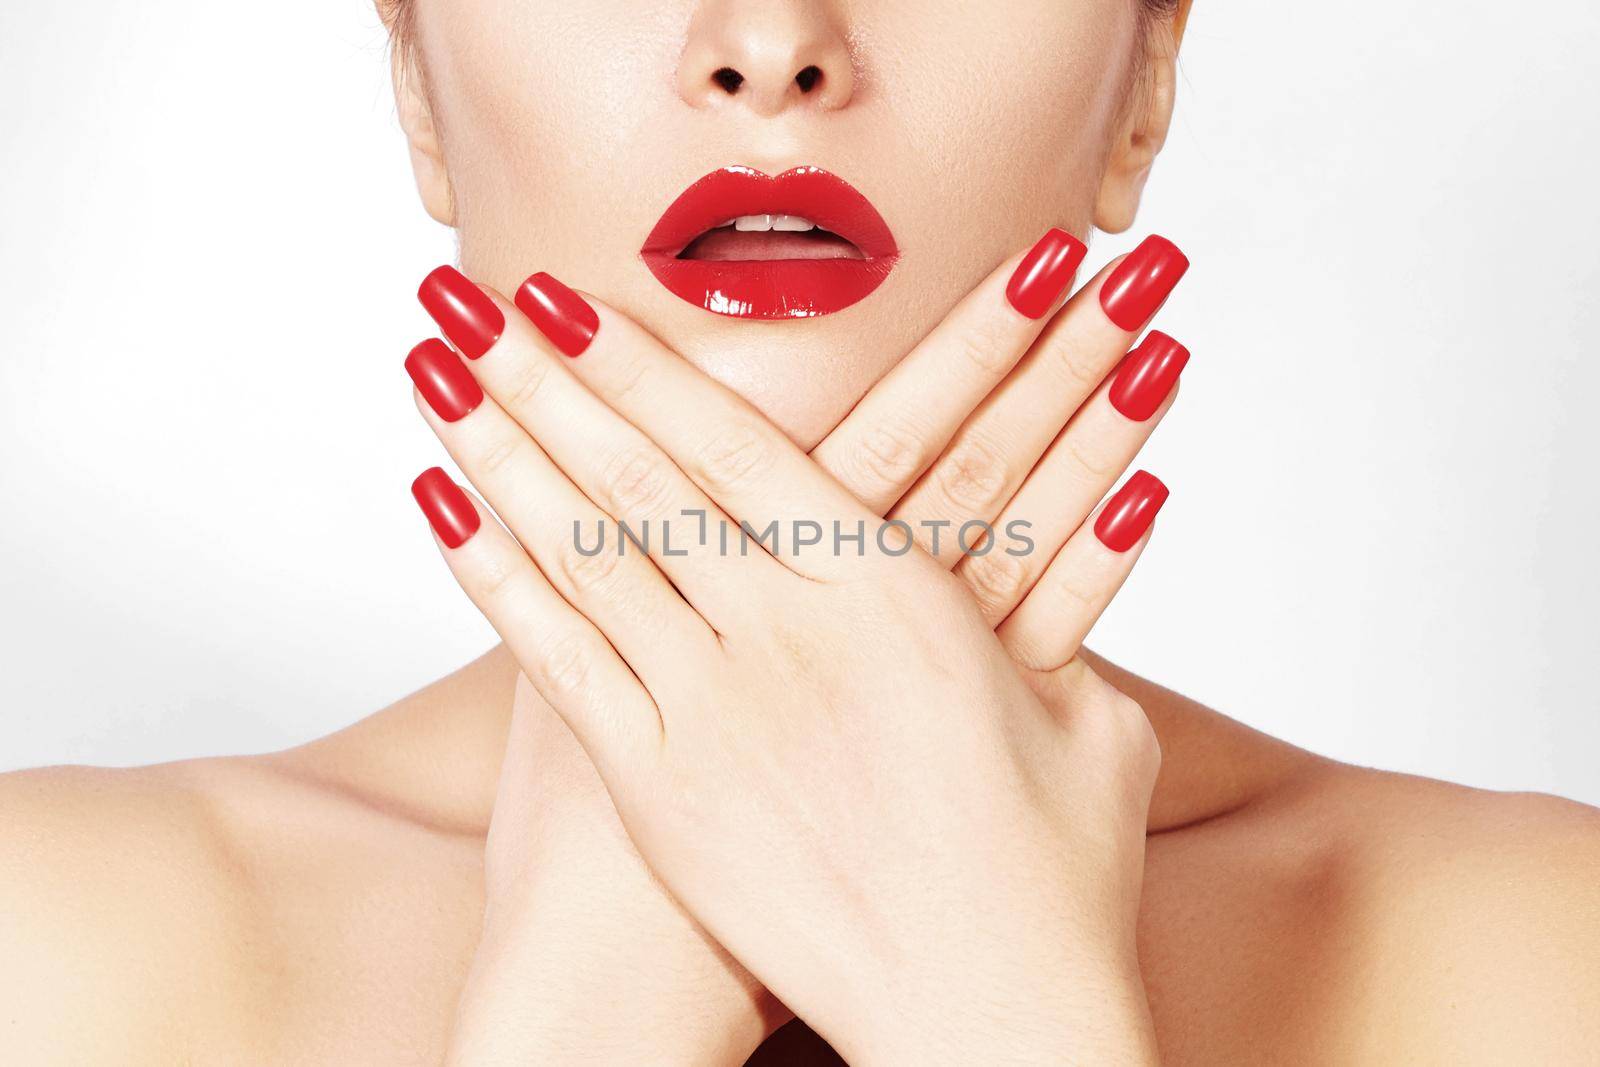 Red lips and bright manicured nails. Sexy open mouth. Beautiful manicure and makeup. Celebrate make up and clean skin. Kiss